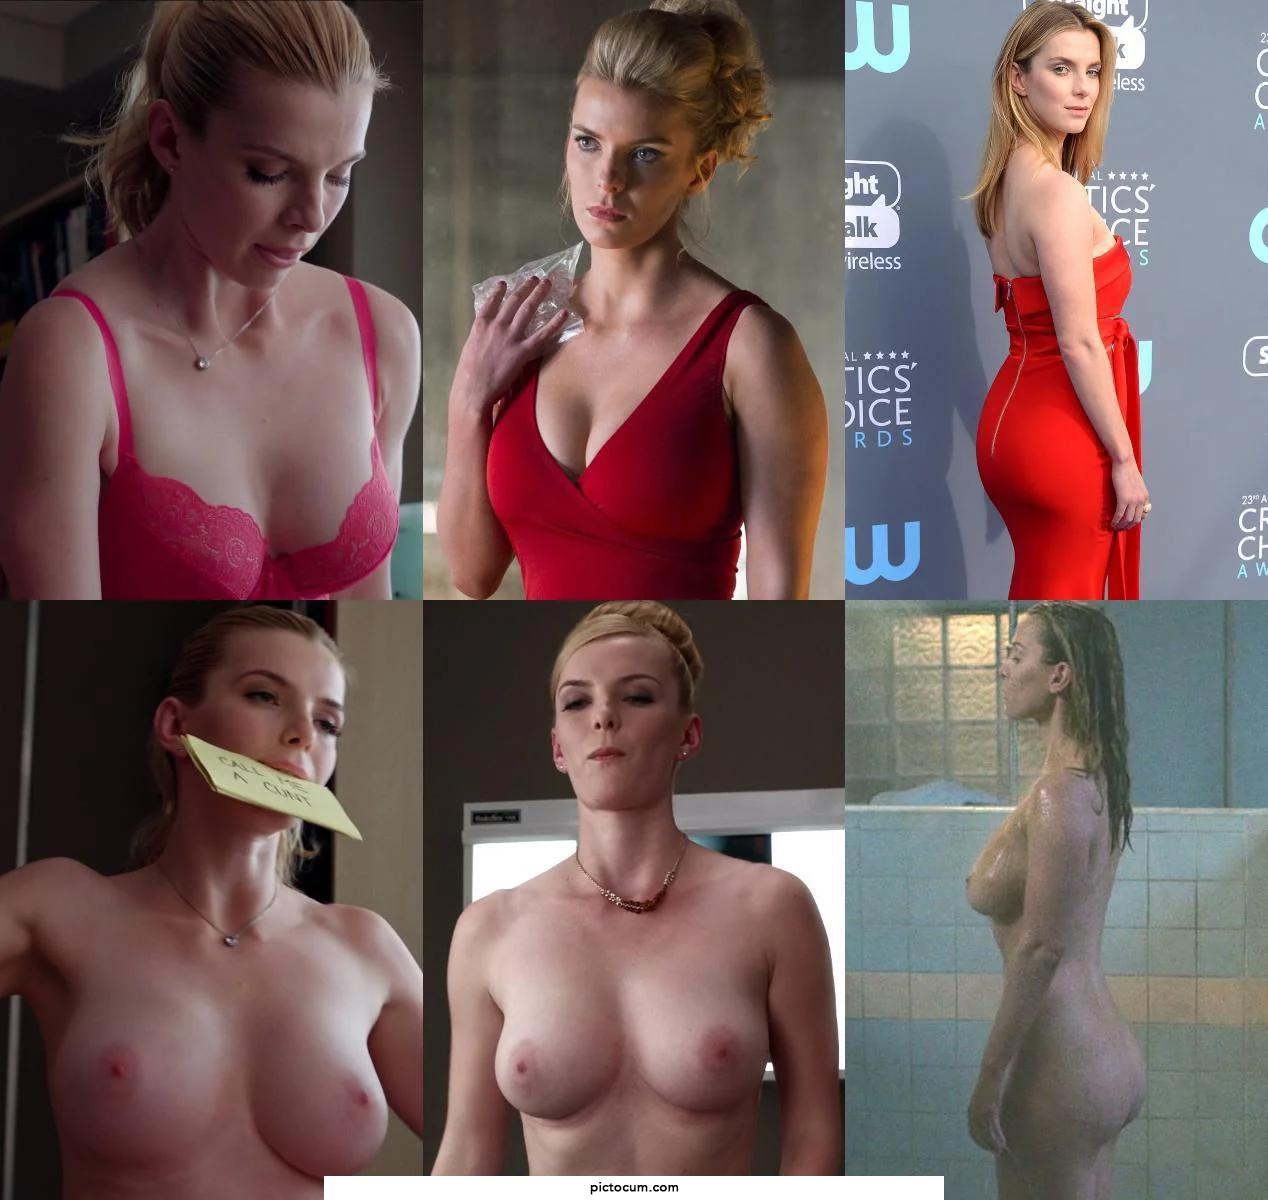 Betty Gilpin is the whole package